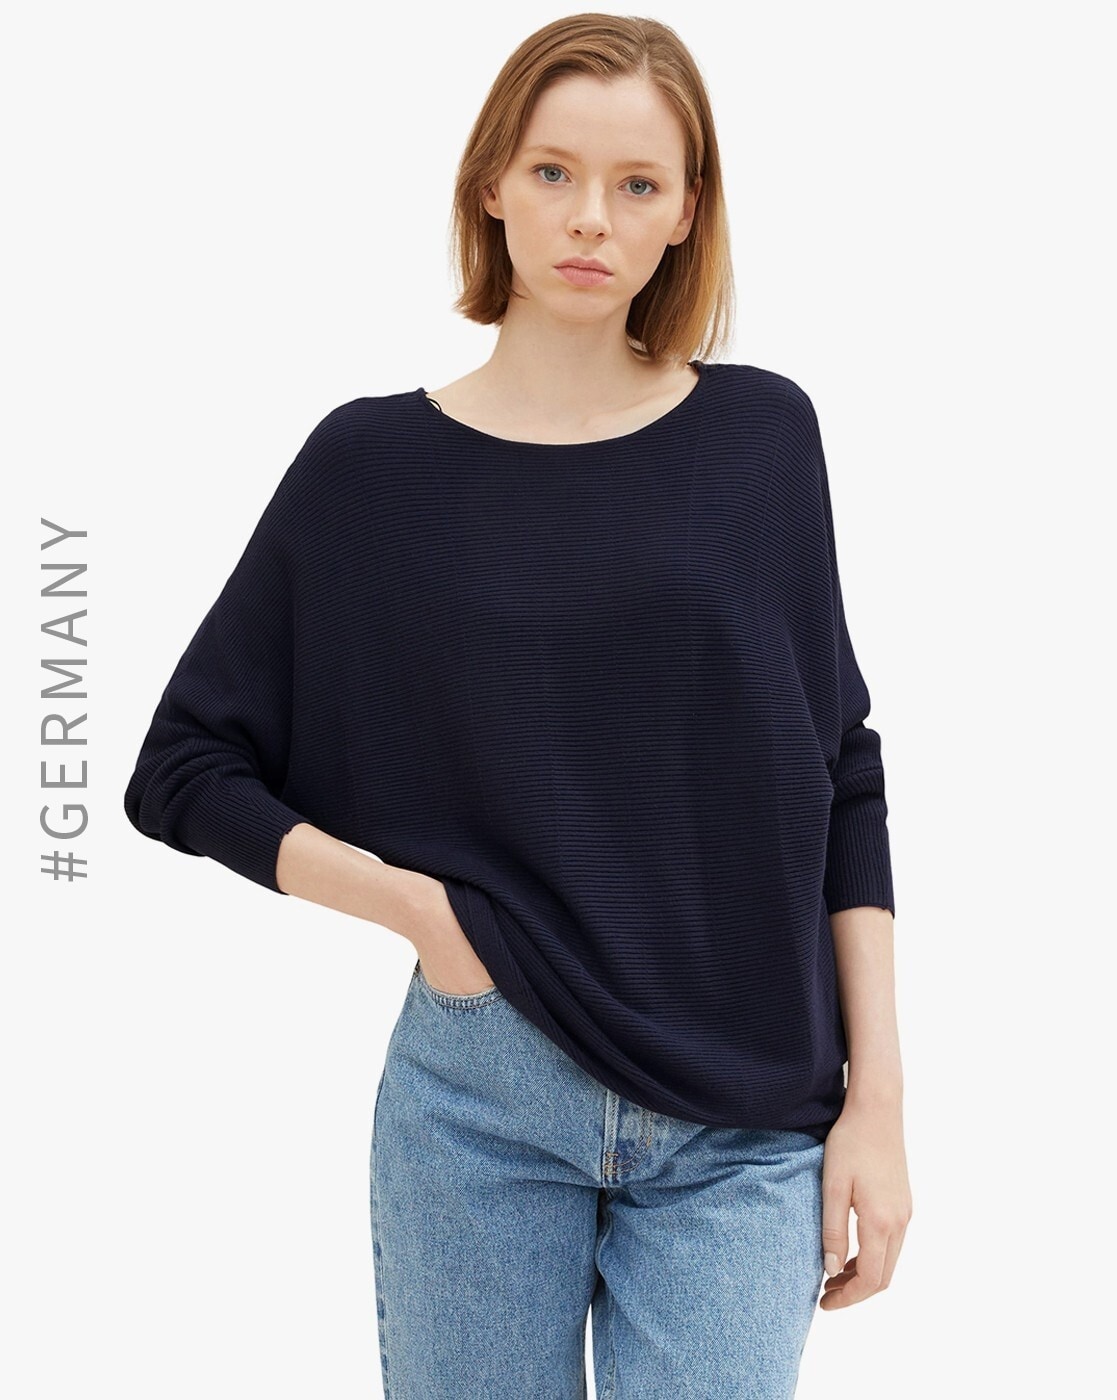 Blue Tom & Buy Cardigans by Sweaters Tailor Women for Online